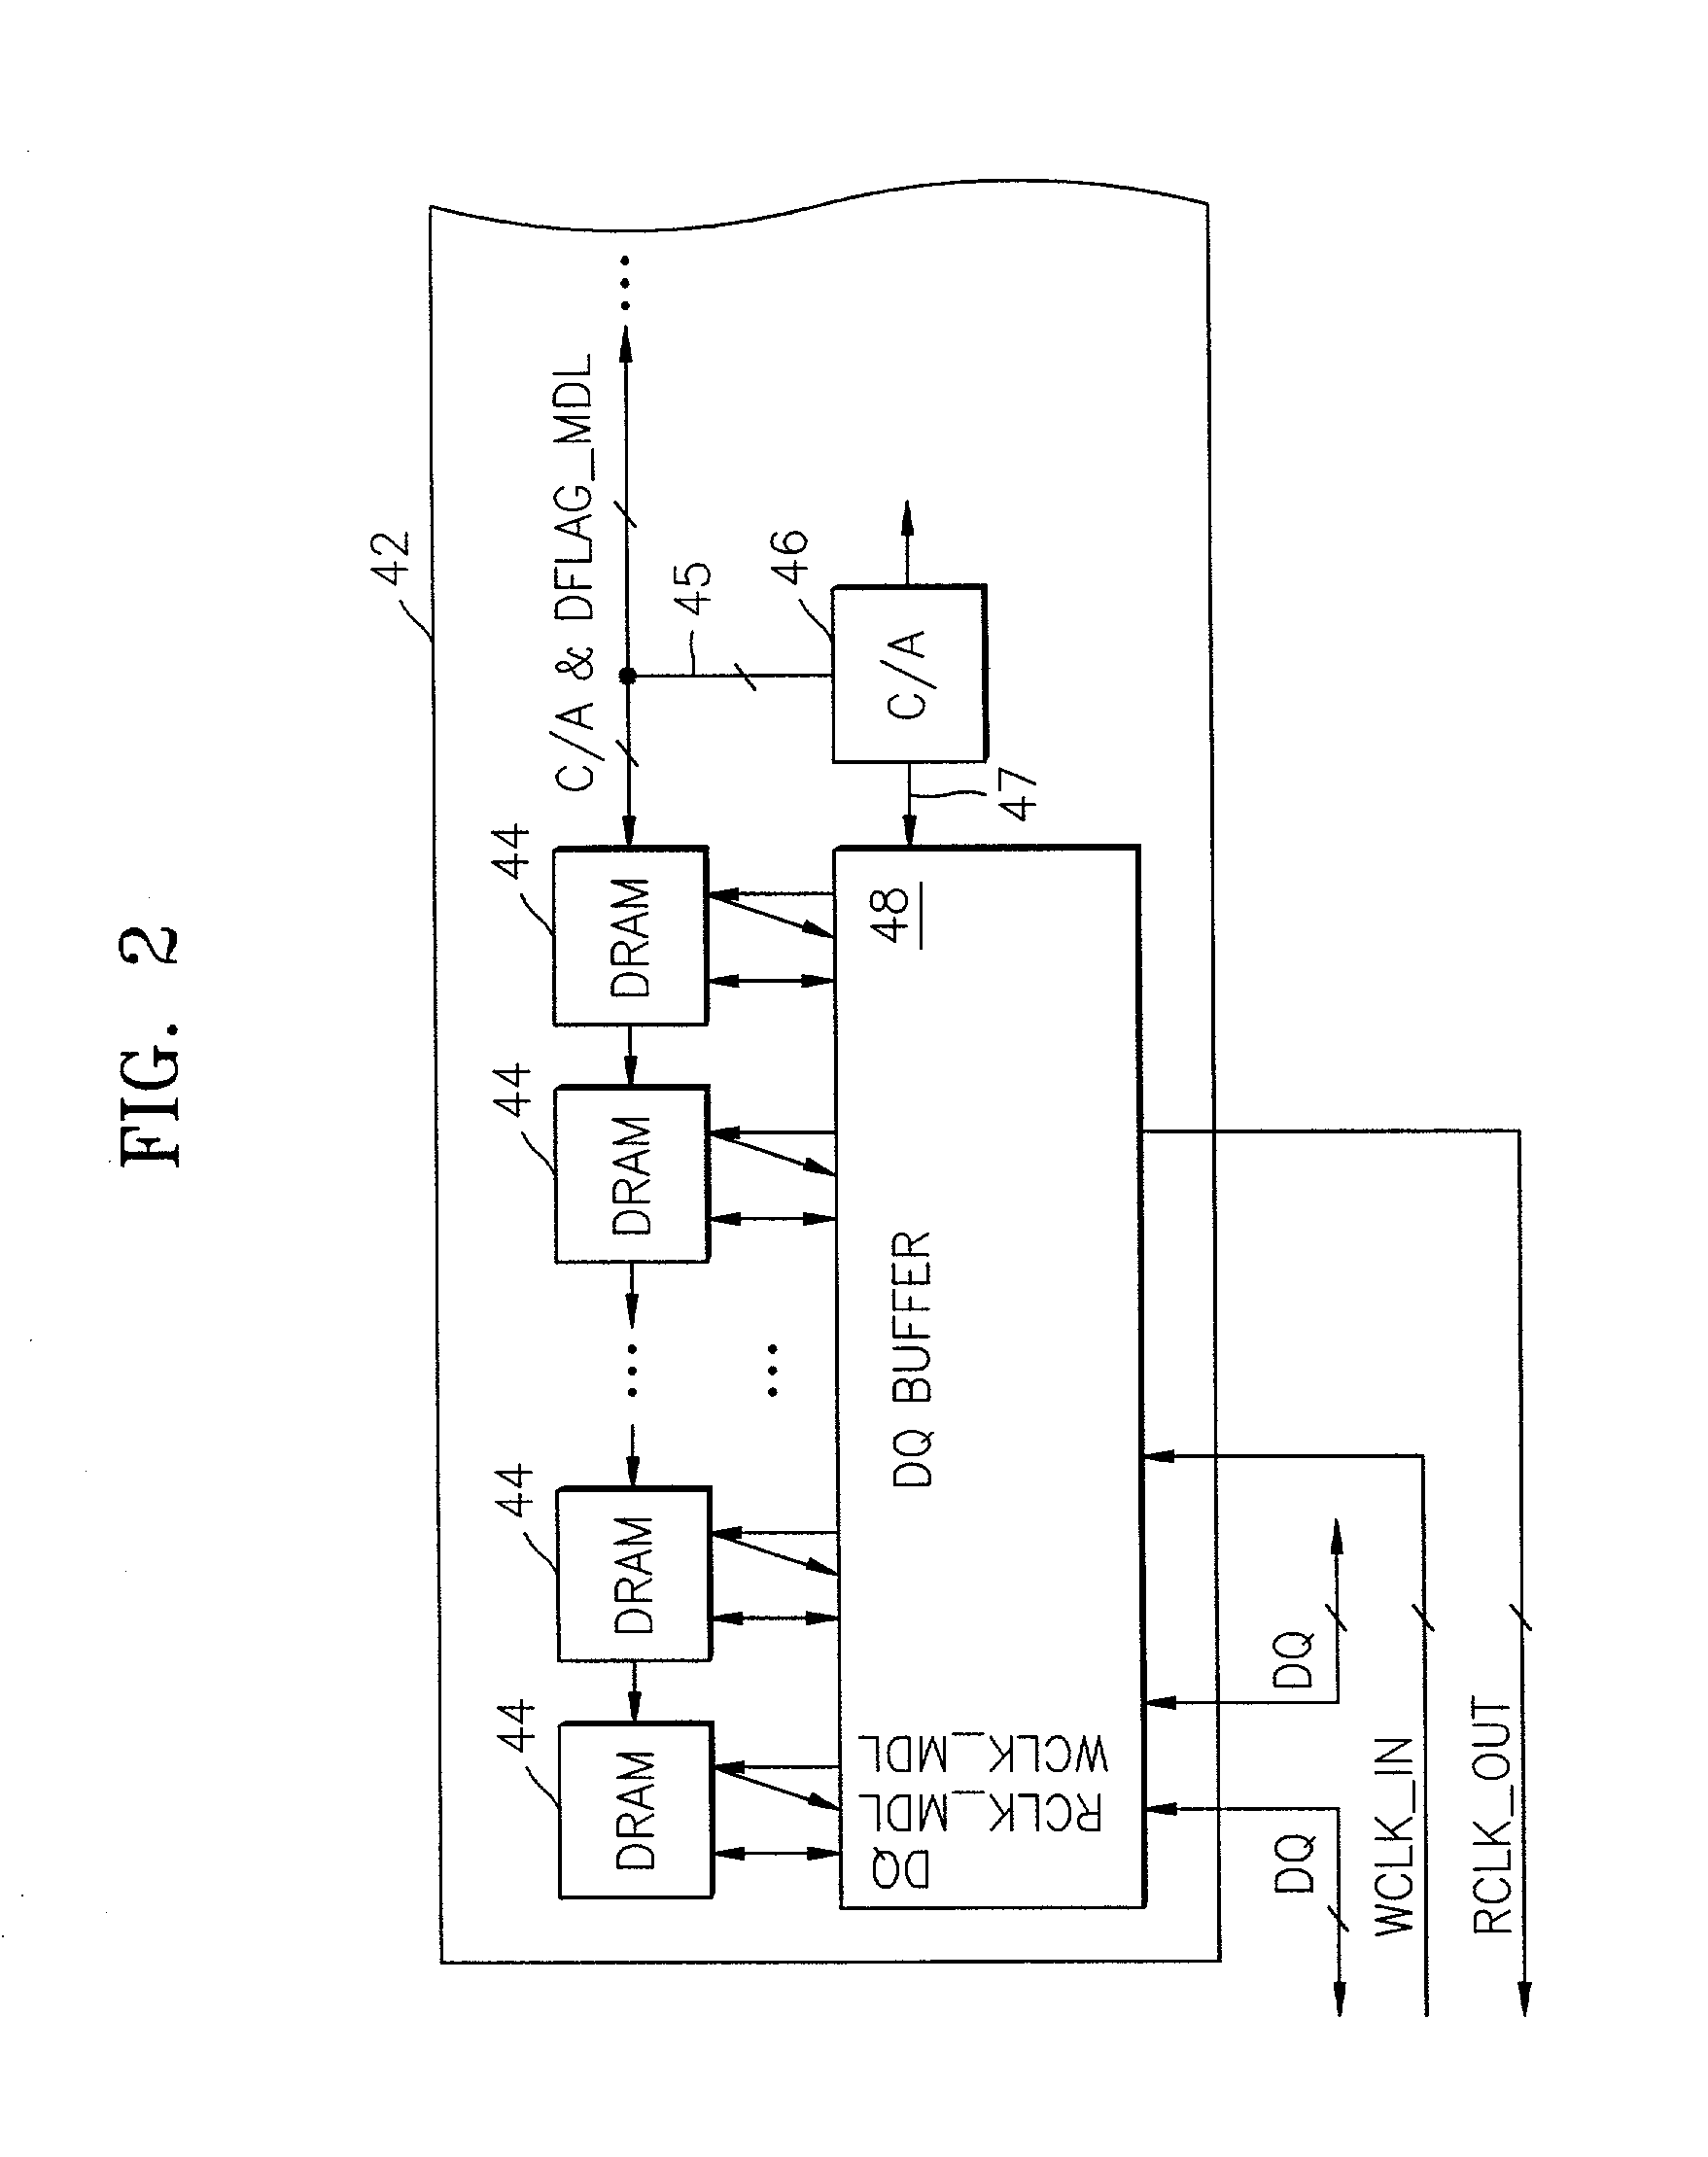 Memory system having point-to-point bus configuration